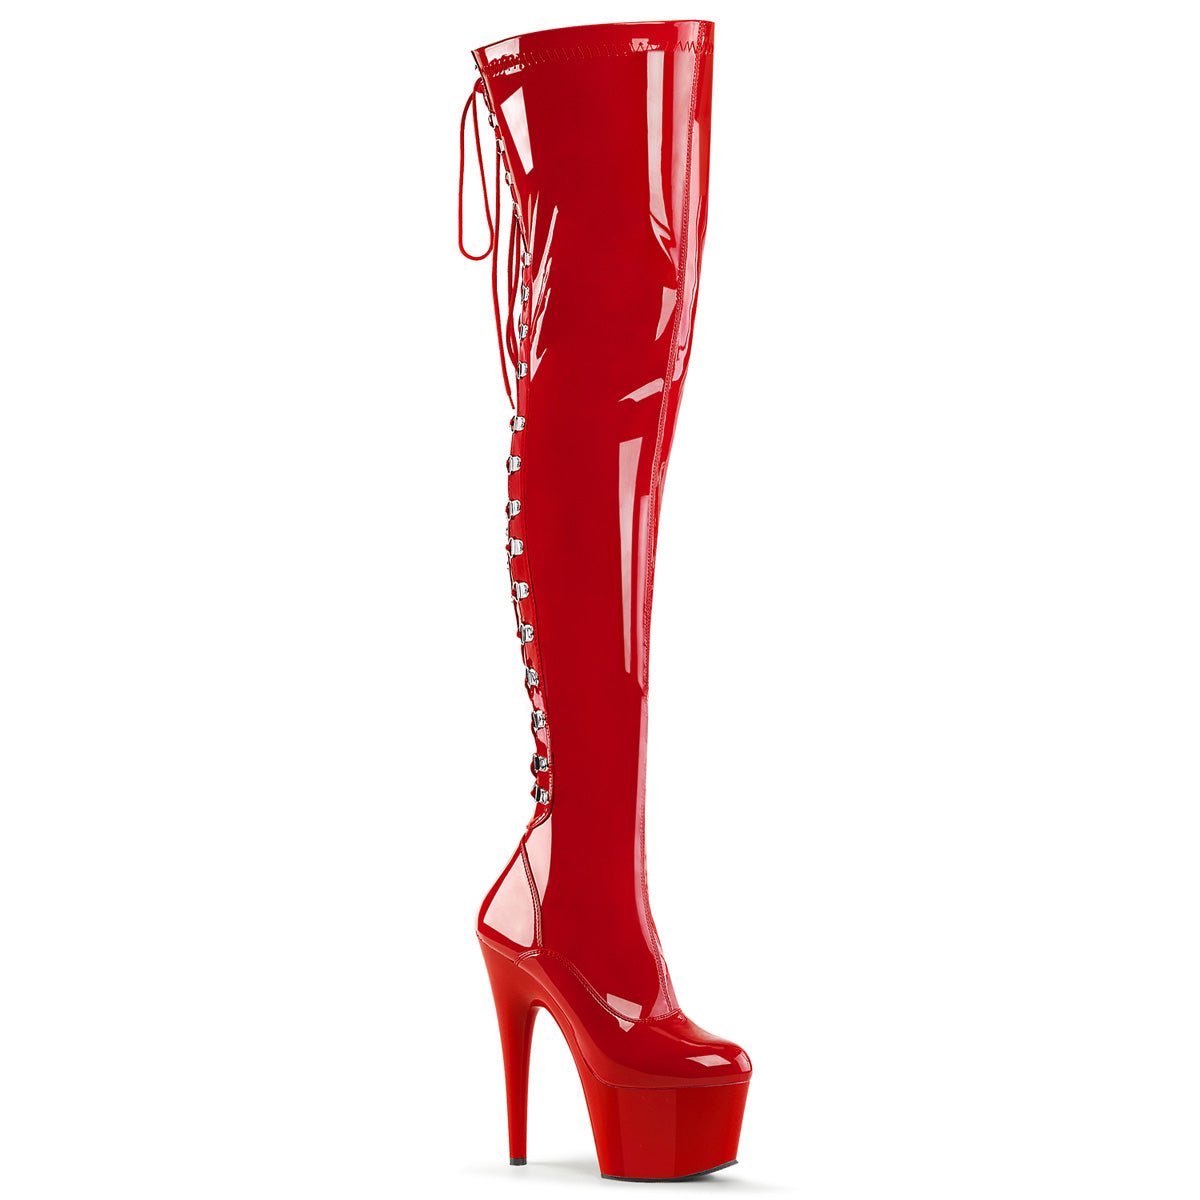 Pleaser Adore 3063 Red - Model Express VancouverBoots